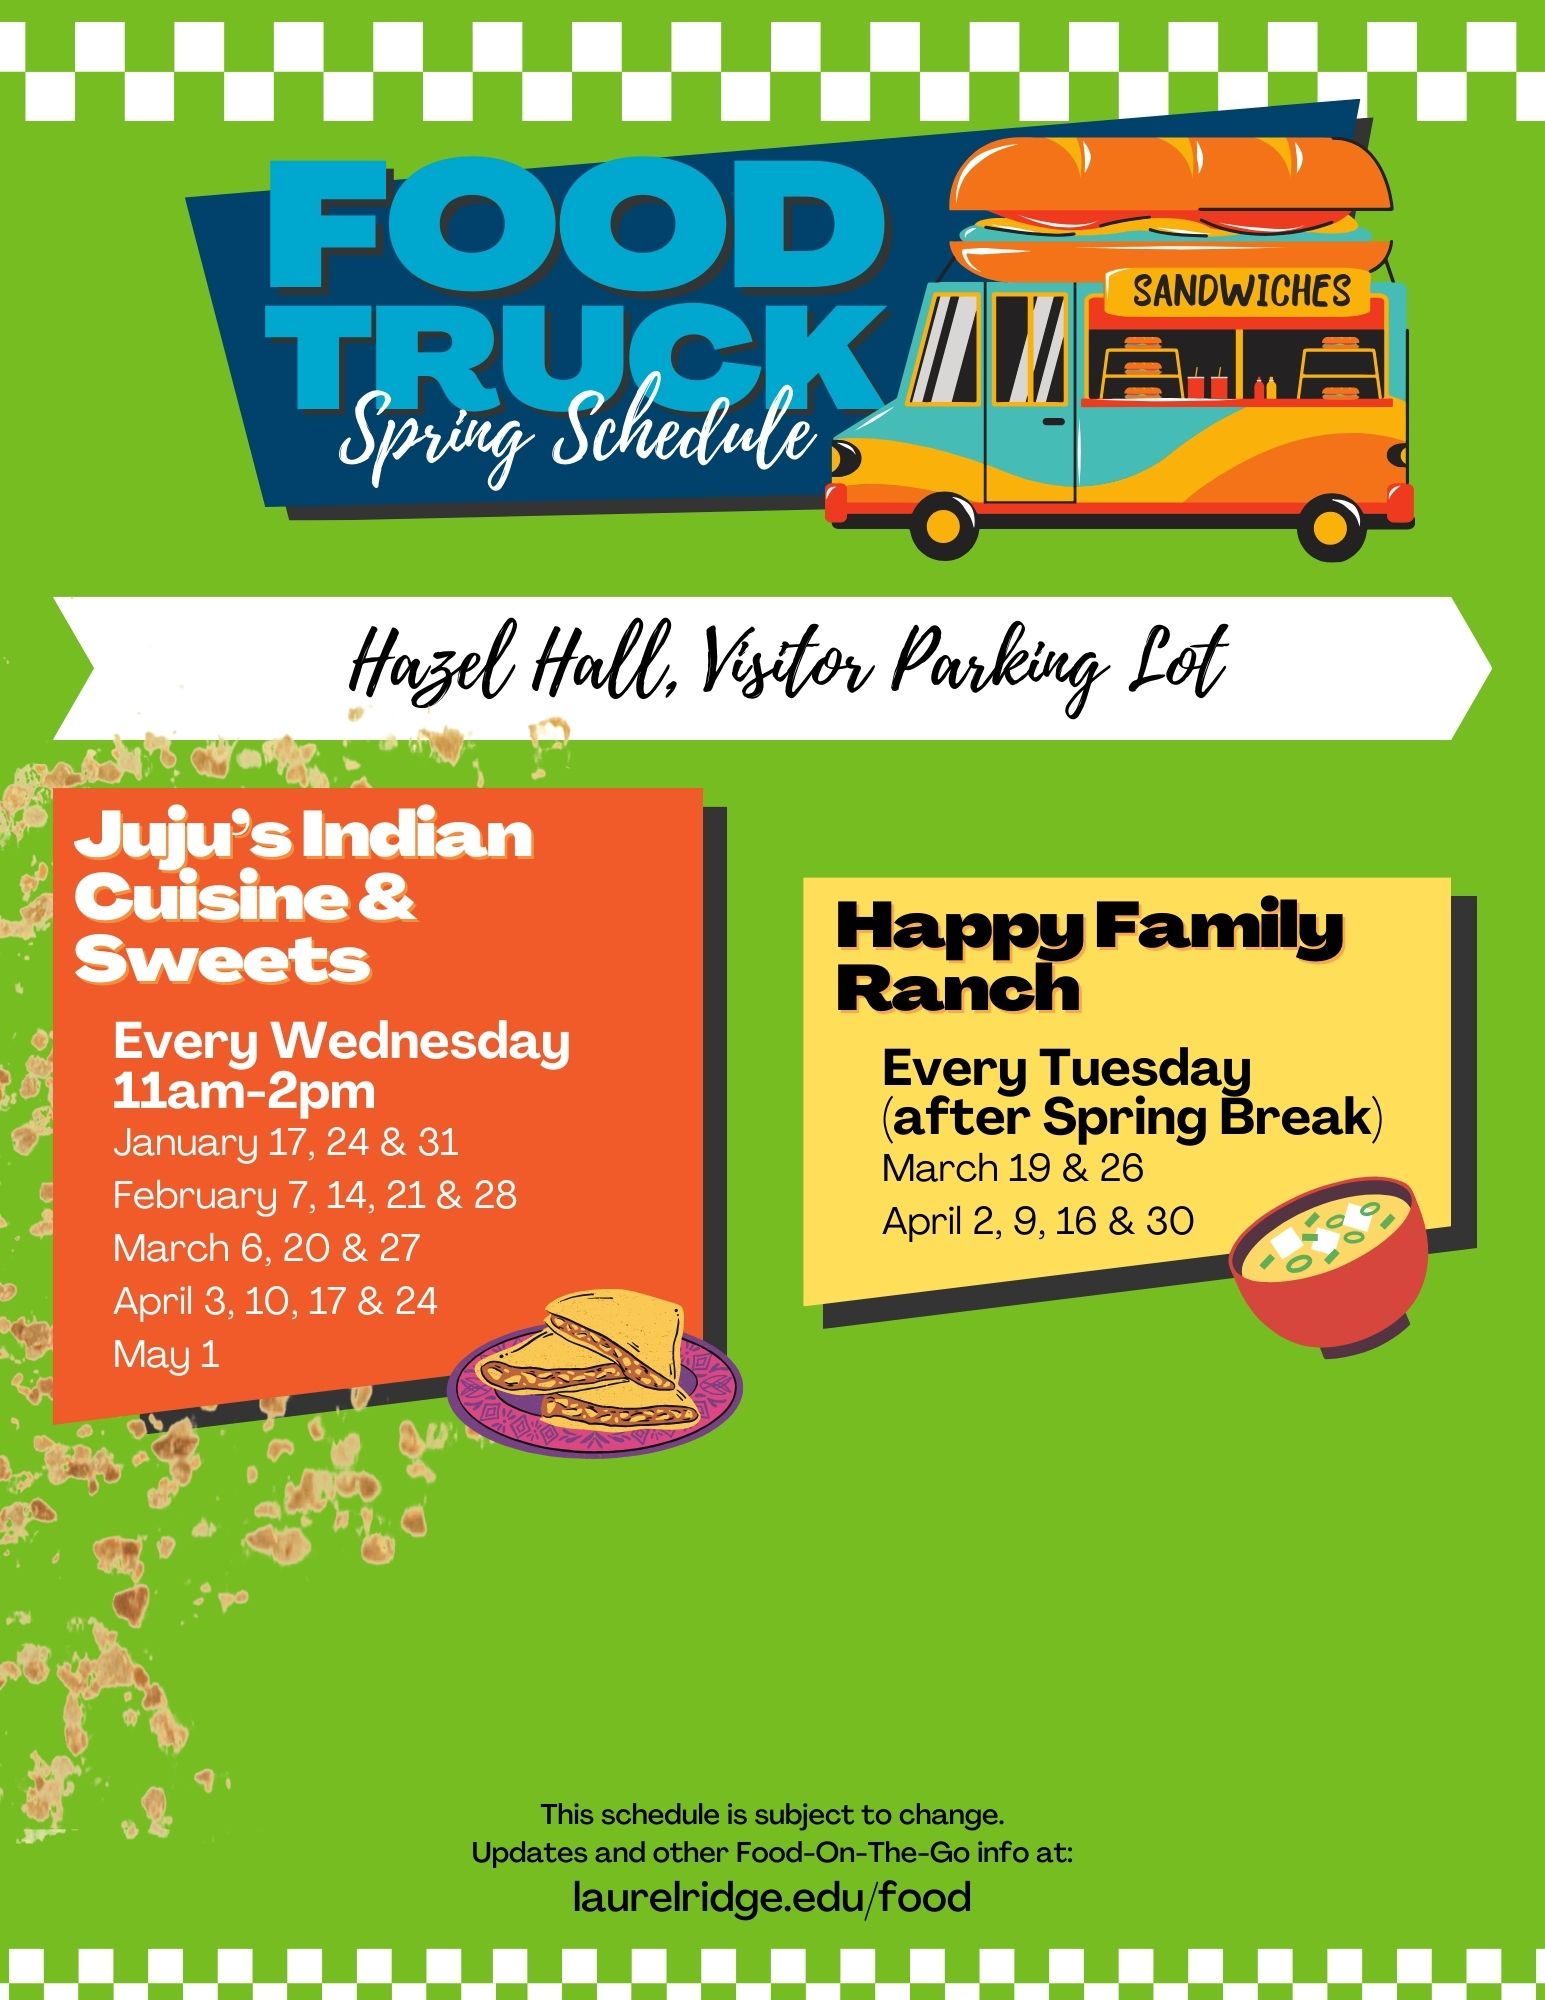 Flyer for Food Truck Spring schedule at Fauquier